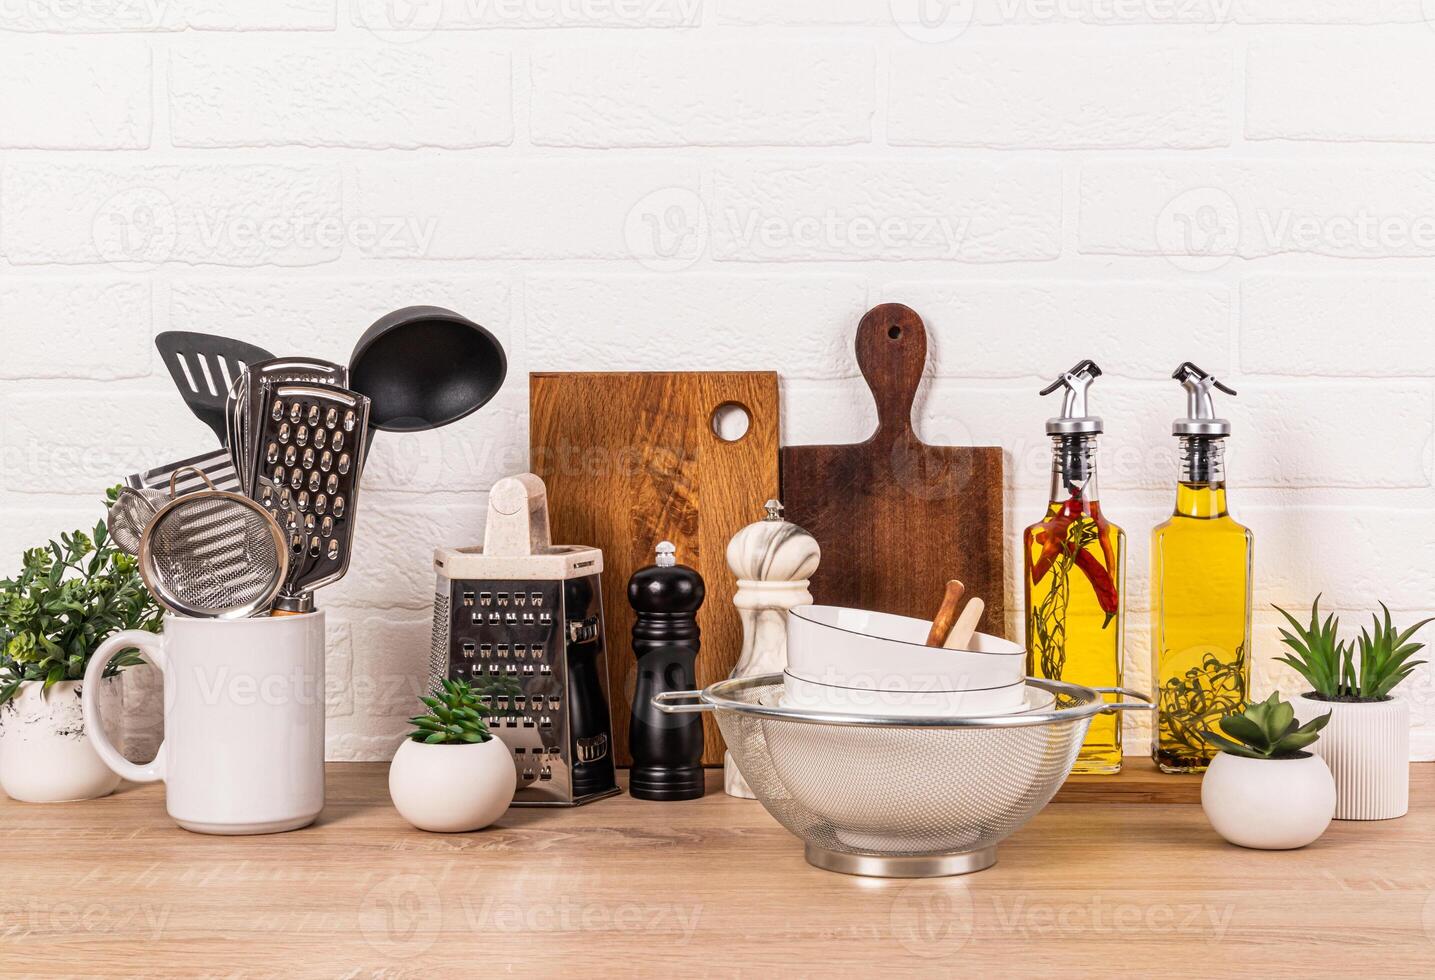 A variety of wooden and metal kitchen utensils on a wooden countertop. Glass bottles with oil in a wooden case. Stylish Storage Area photo